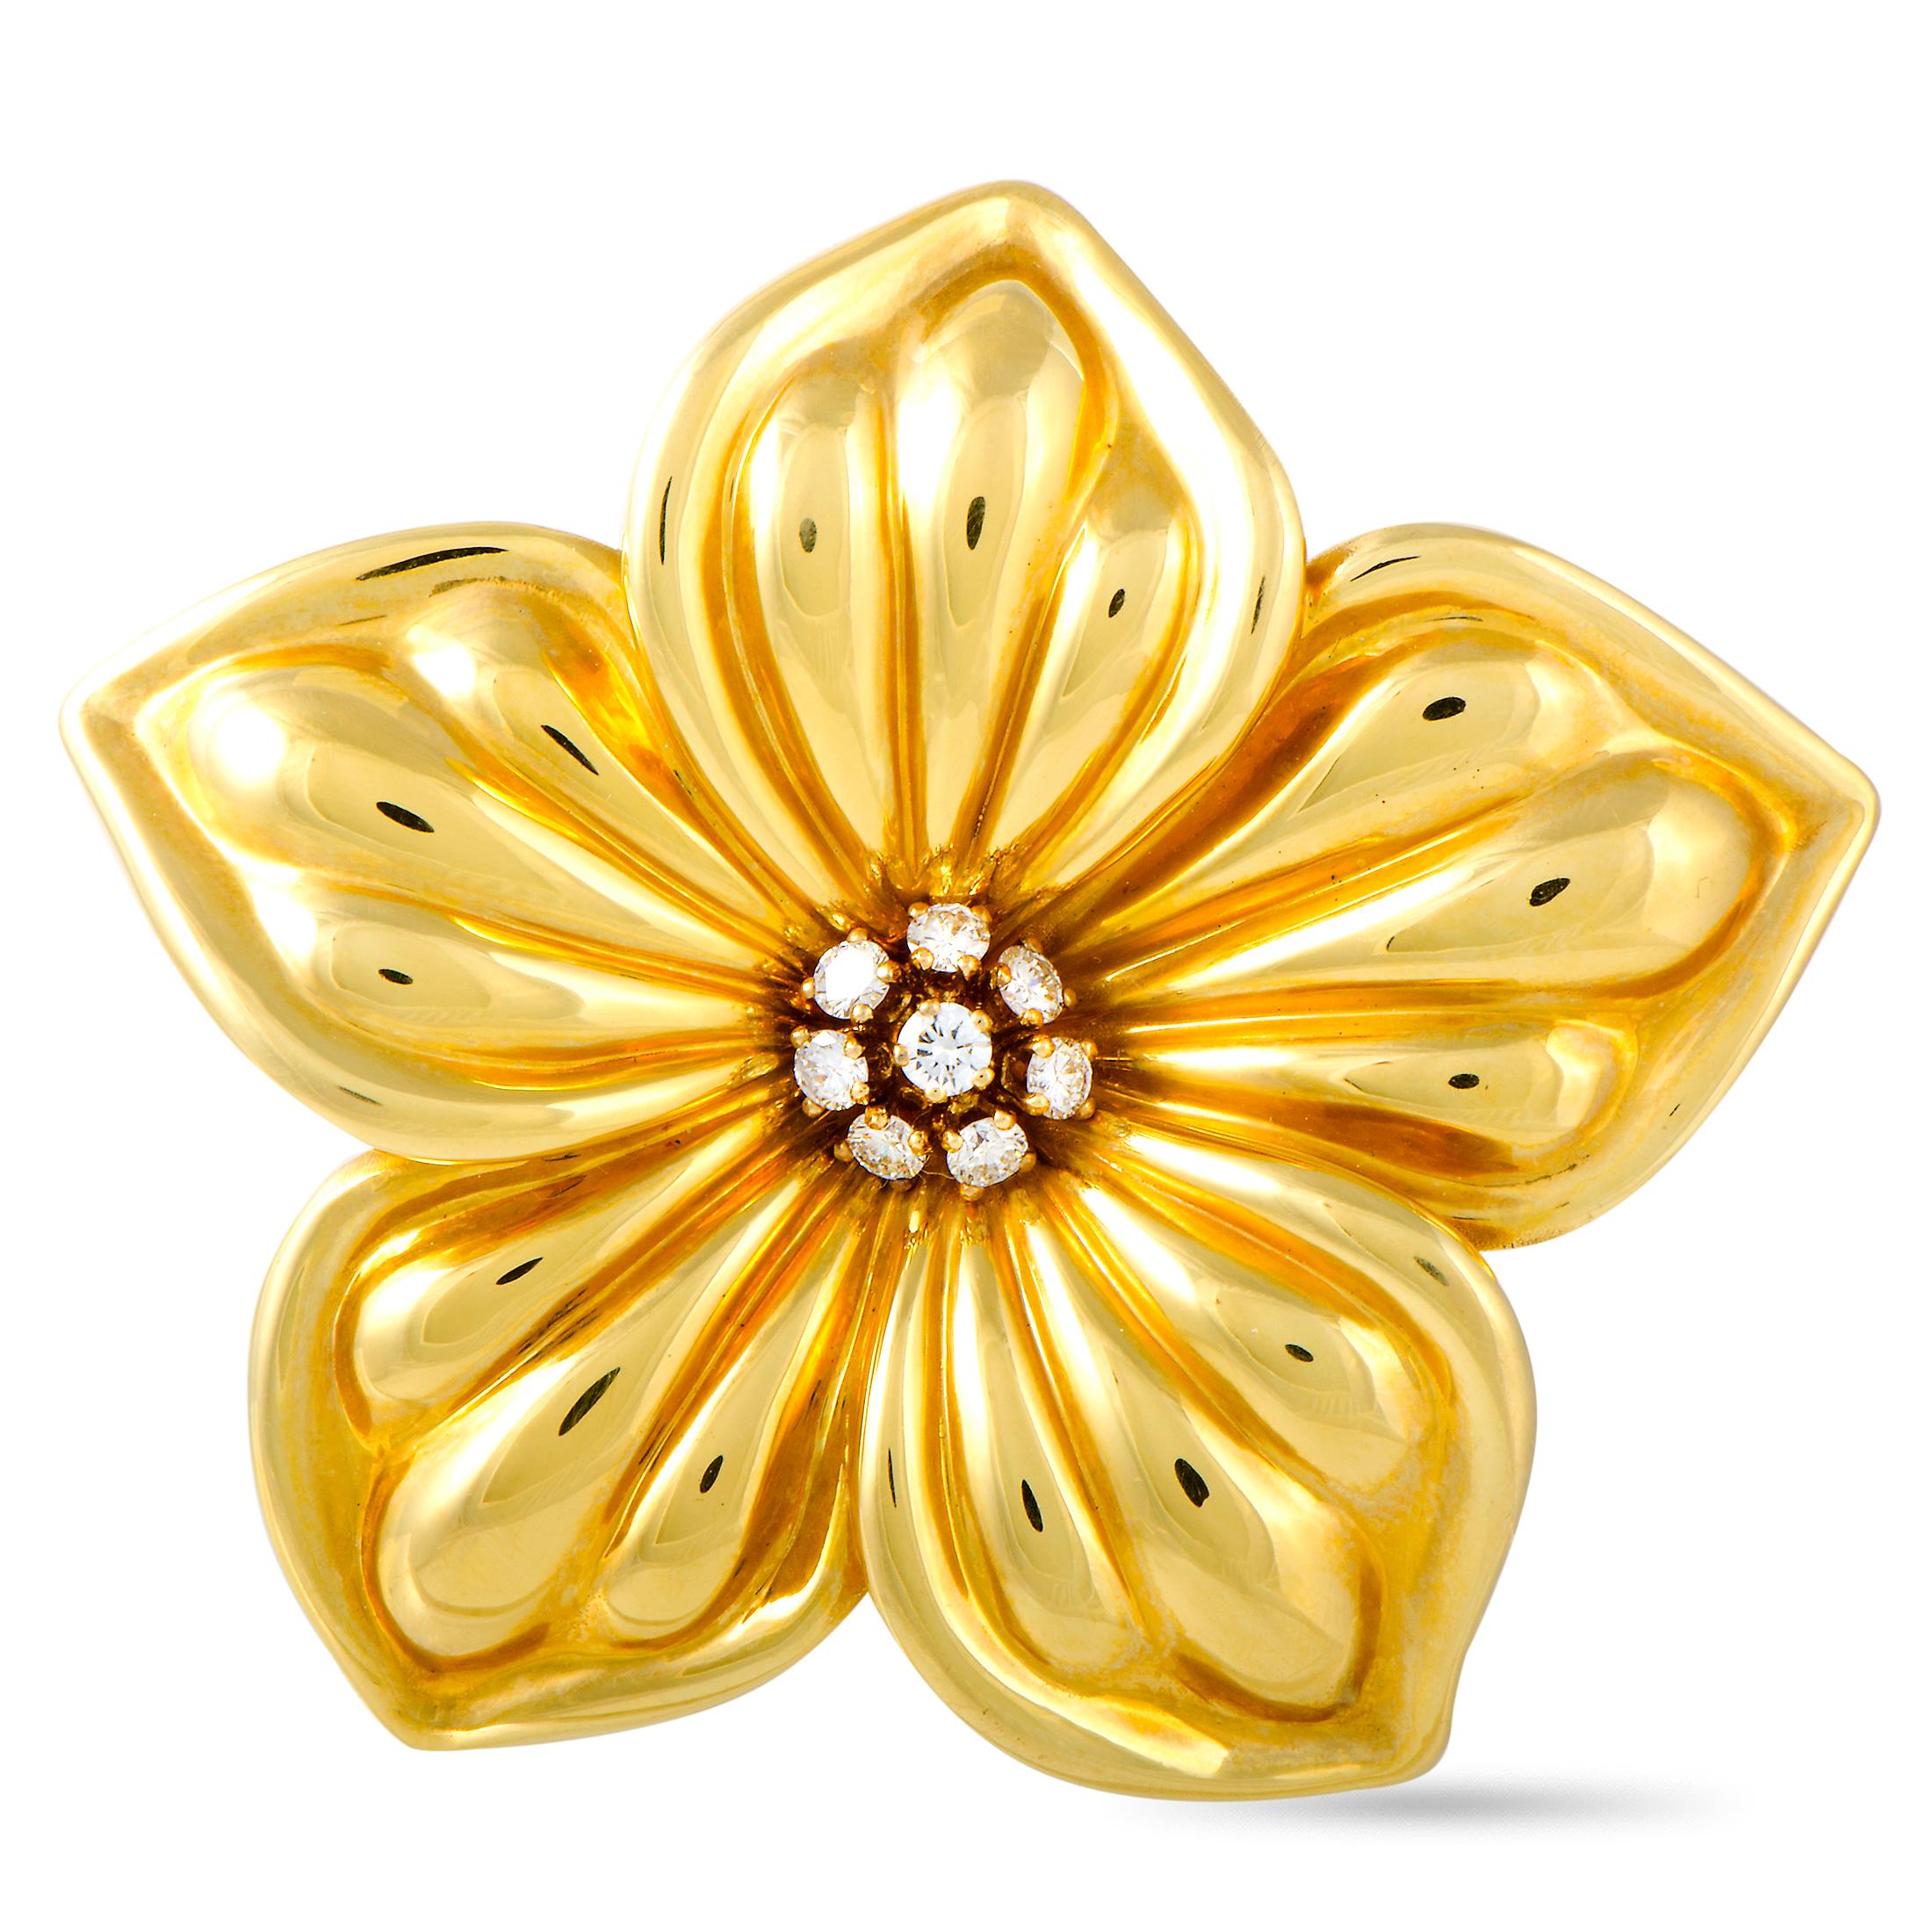 This Van Cleef & Arpels brooch is crafted from 18K yellow gold and weighs 25.7 grams, measuring 2.20” in length and 2.20” in width. The brooch is set with diamonds that total 0.85 carats and boast grade E color and VS1 clarity.

Offered in estate